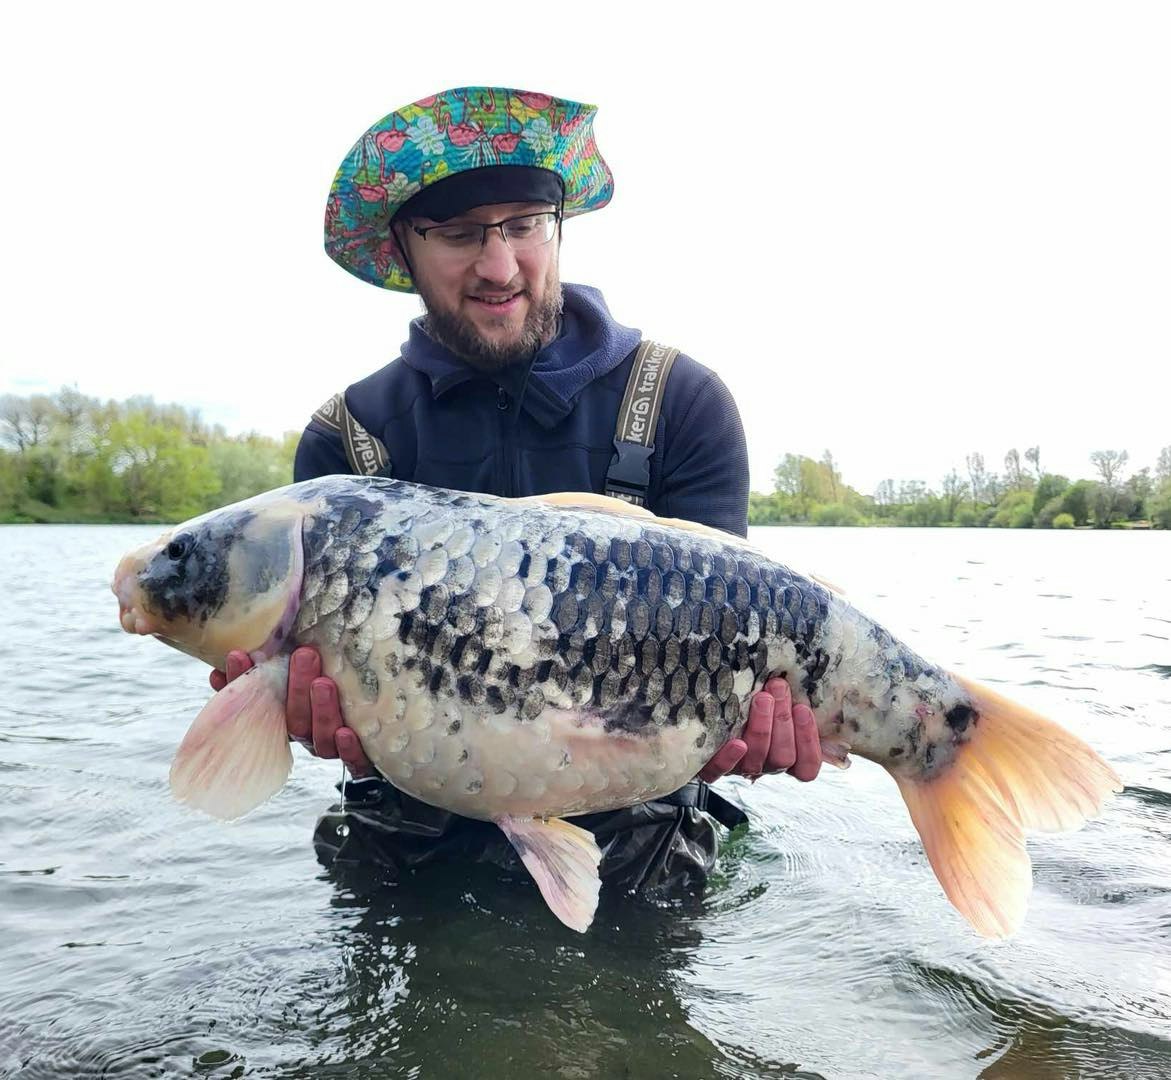 Kyle with the Koi, one of Linear